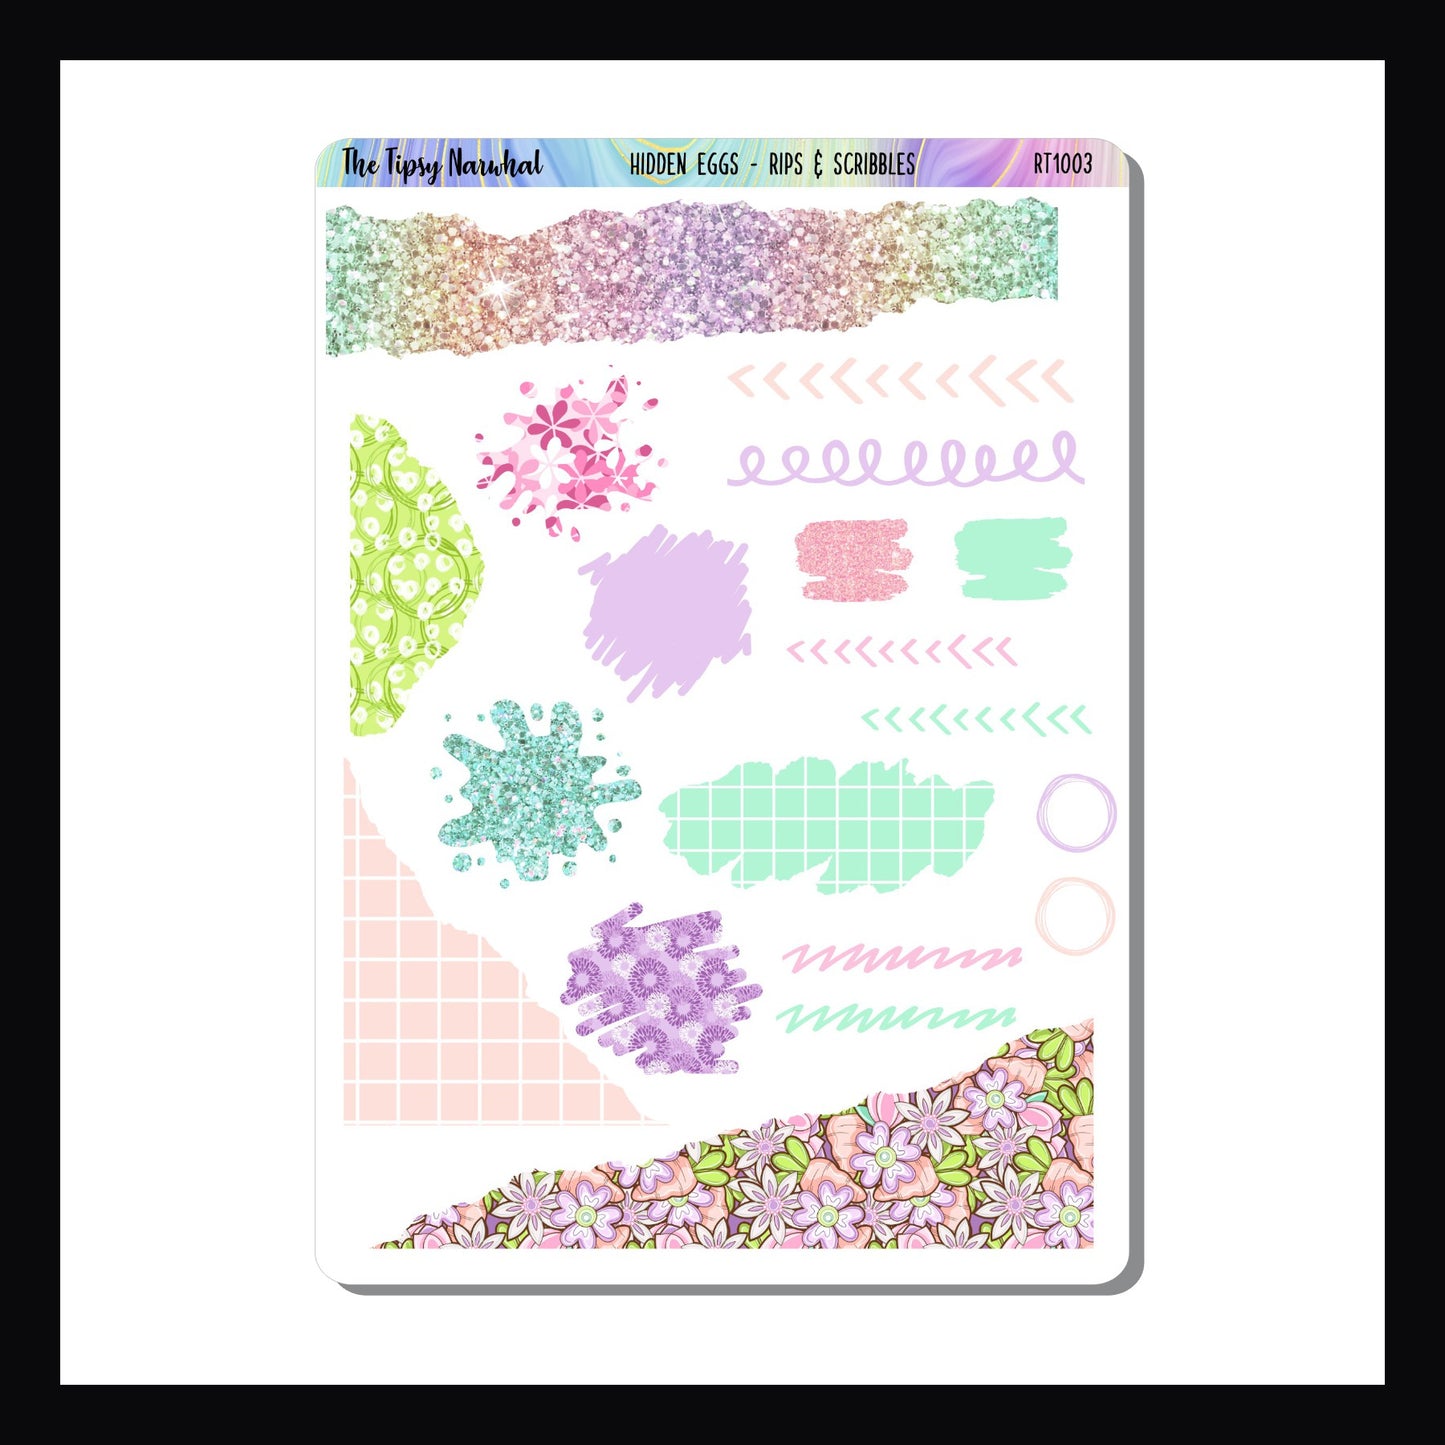 Hidden Eggs Hobonichi Weeks Rips & Scribbles Sheet.  Sticker sheet features multiple stickers with a torn paper appearance, paint splatter stickers and many abstract scribble stickers.